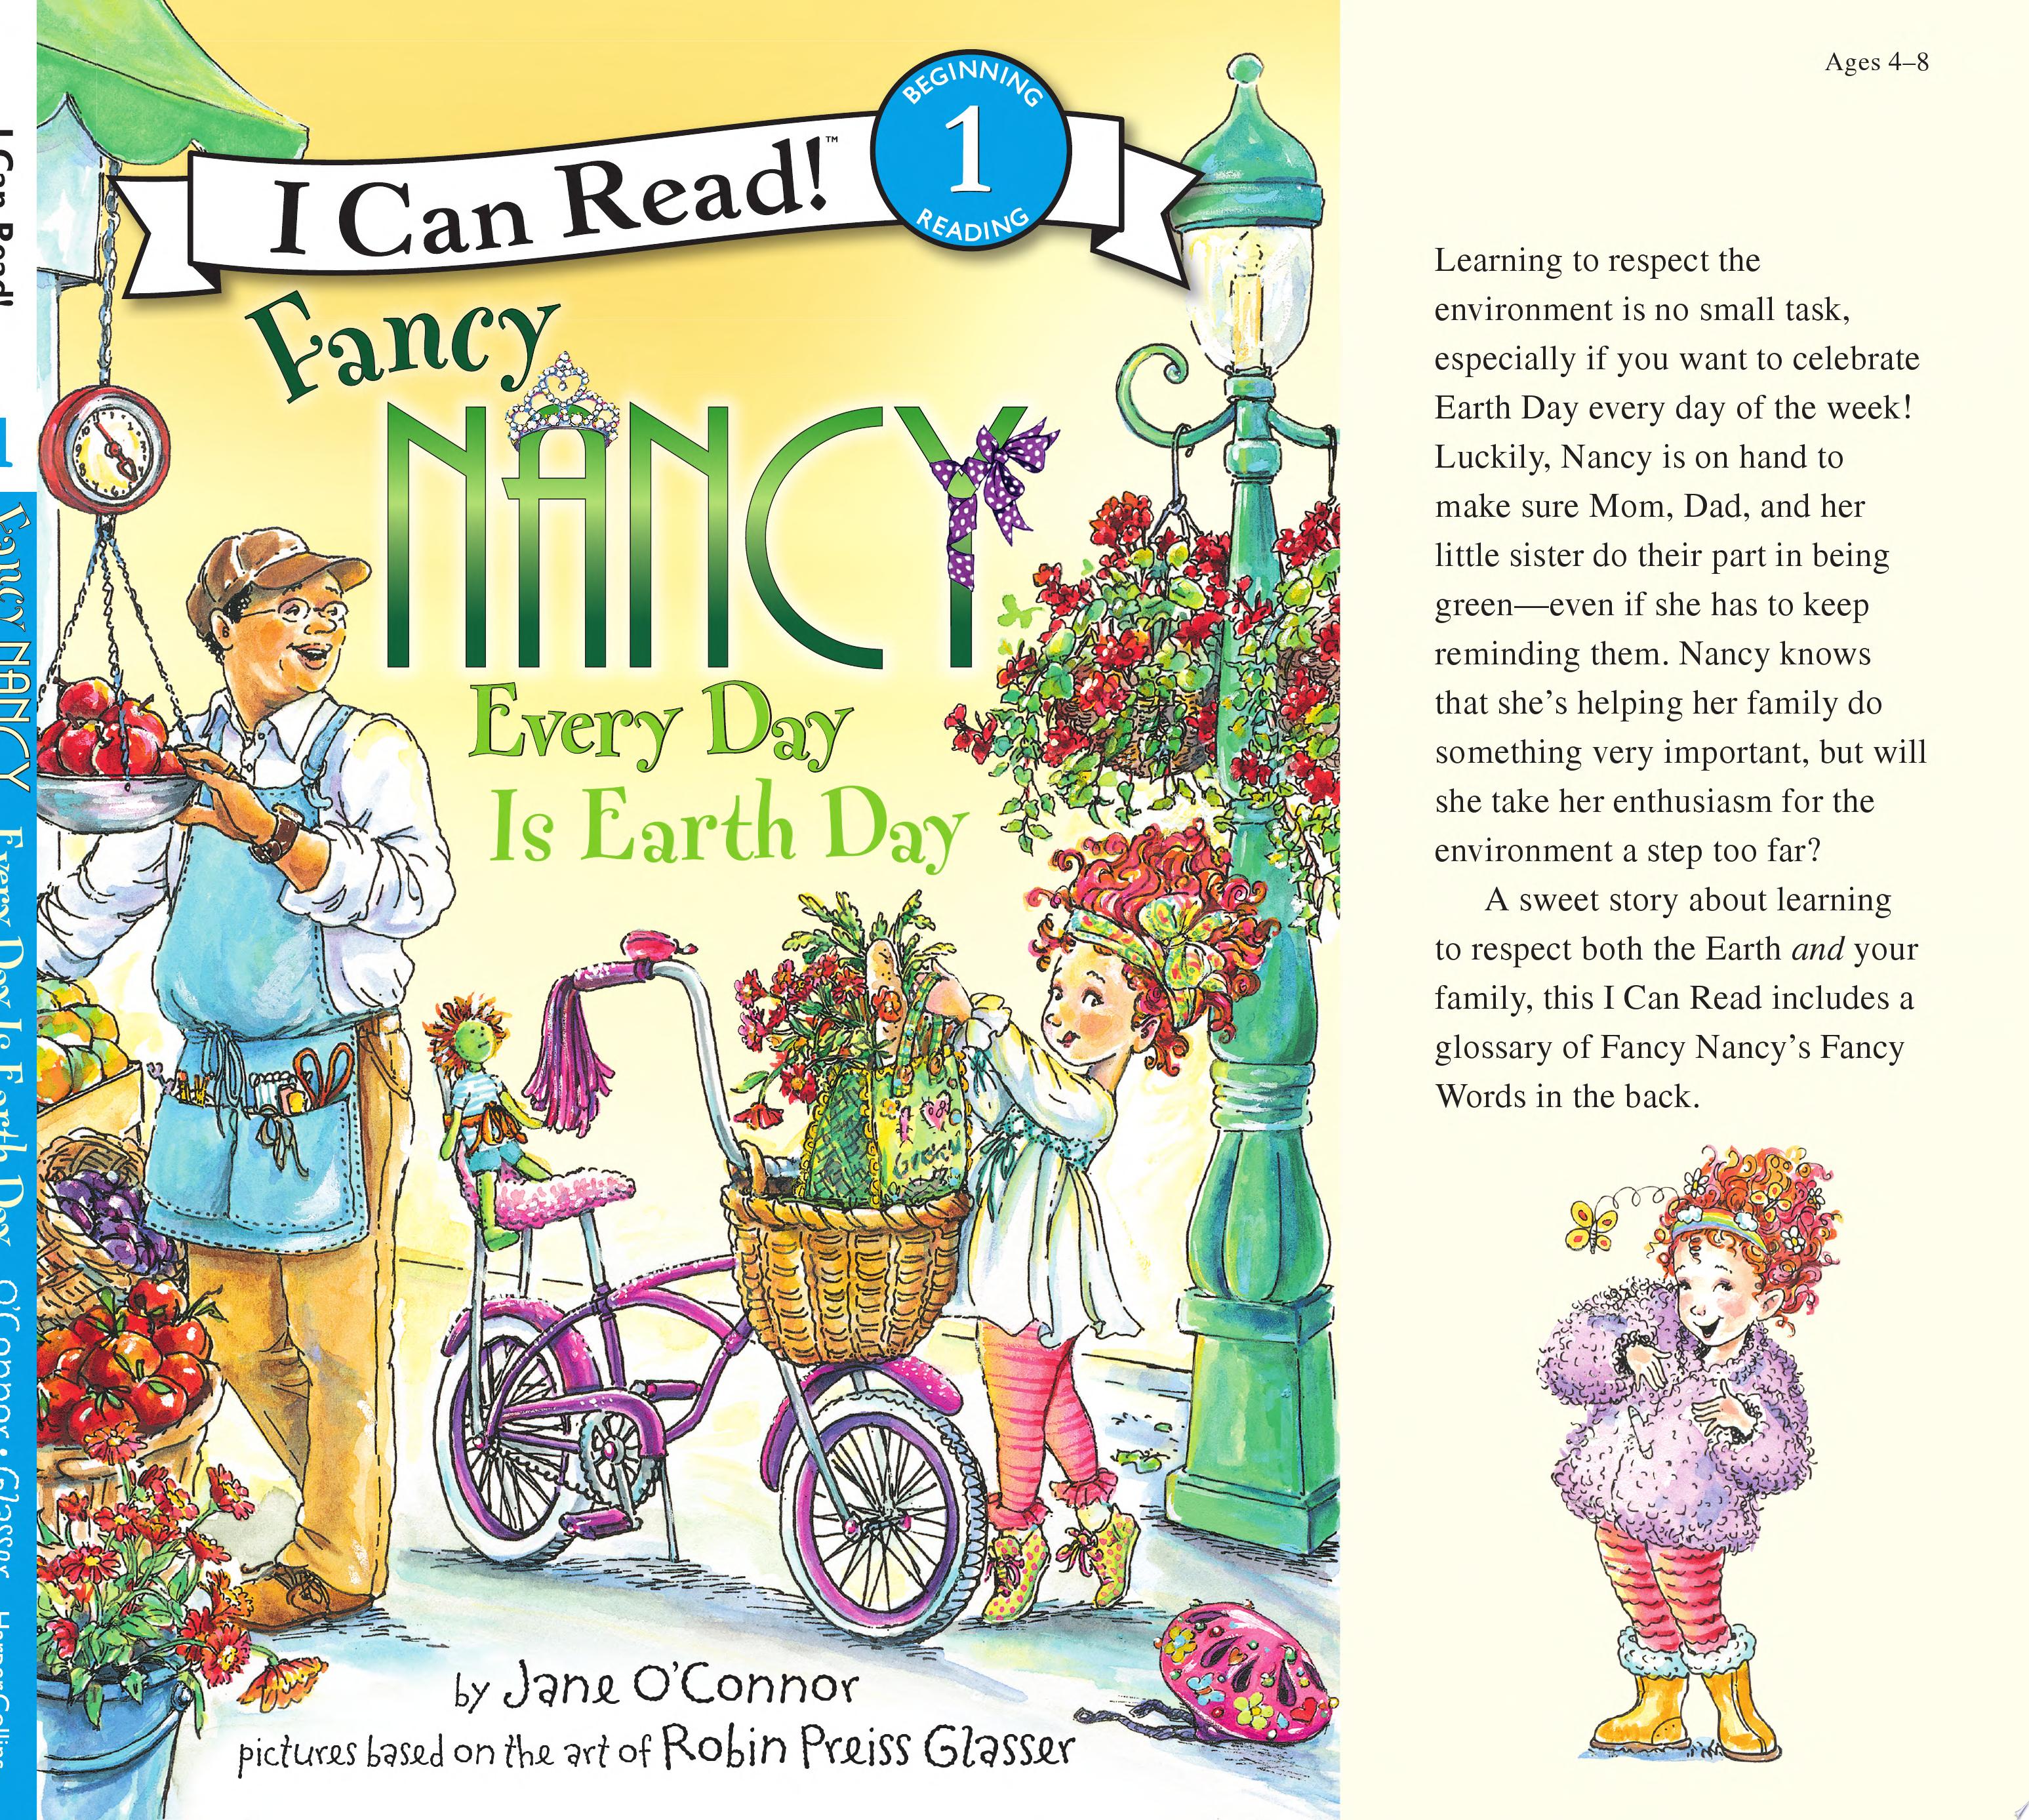 Image for "Fancy Nancy: Every Day Is Earth Day"